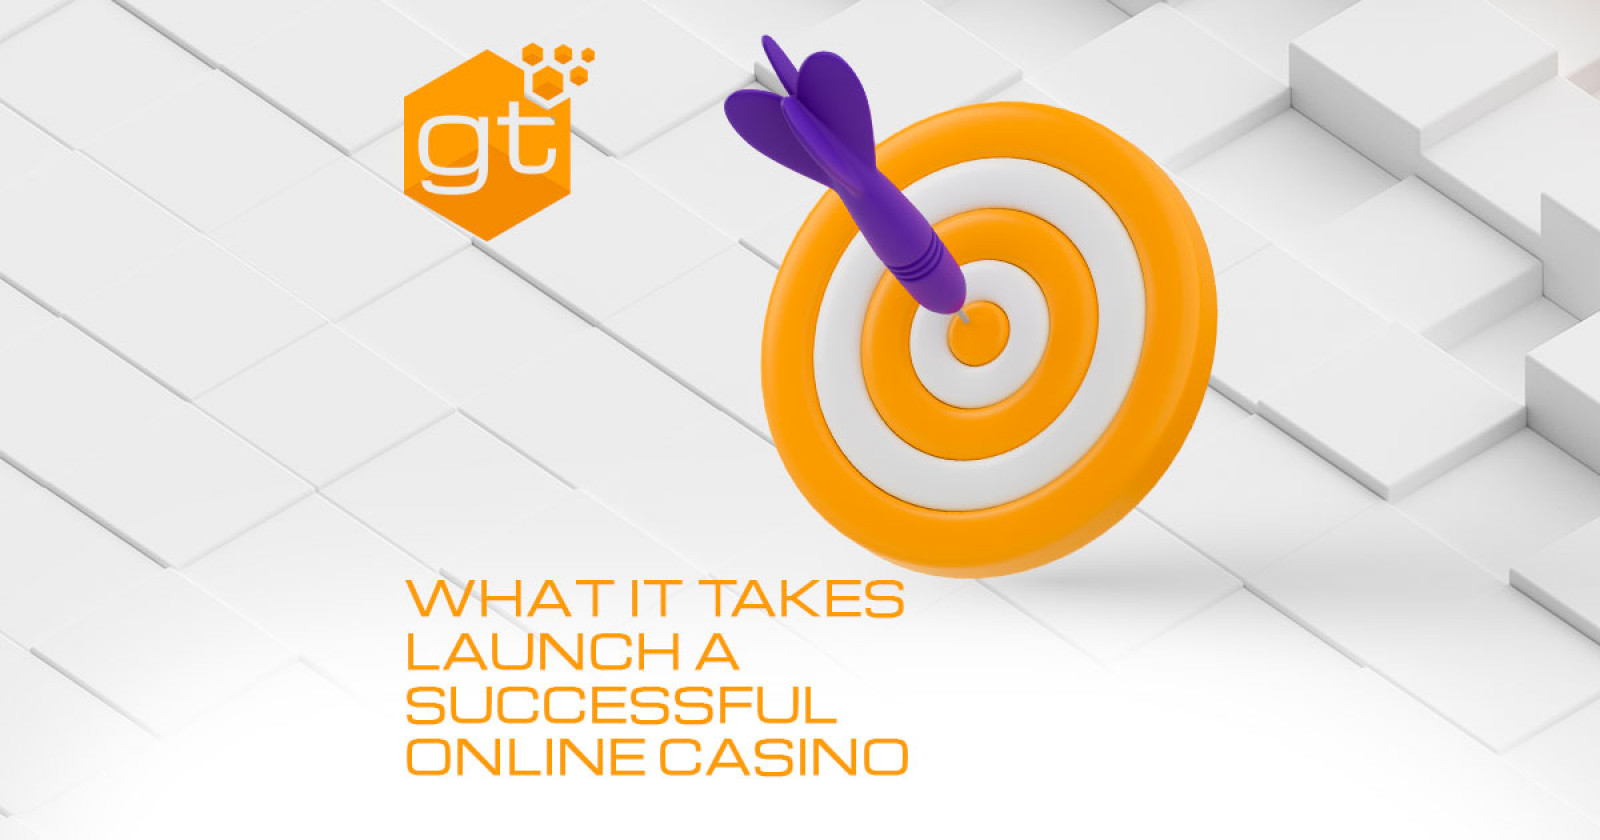 The necessary actions to launch a successful online casino